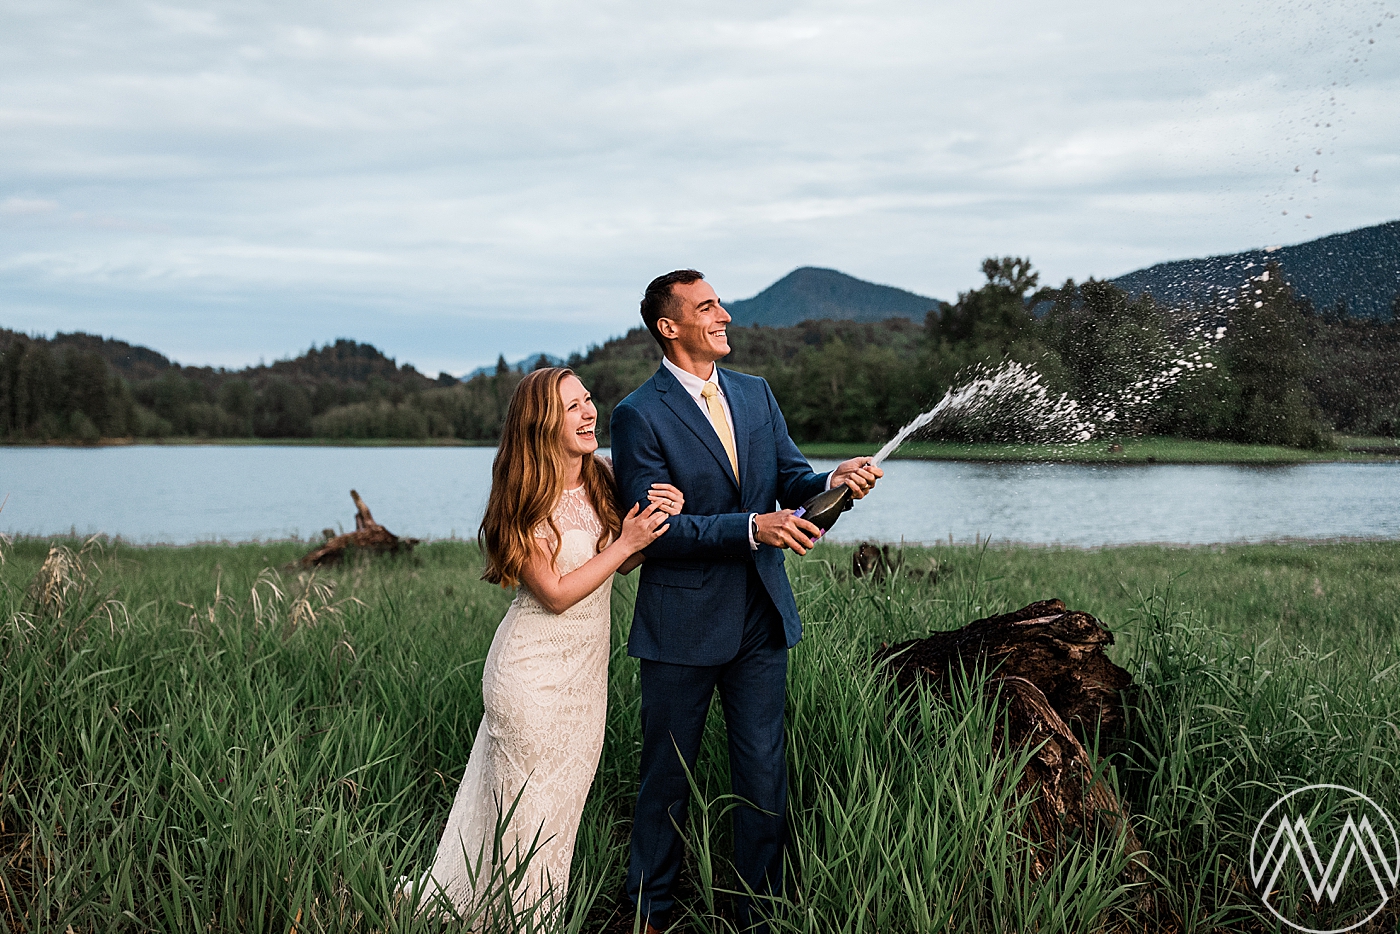 Champagne celebration after intimate elopement at Mount Rainier. Photographed by Megan Montalvo Photography. 